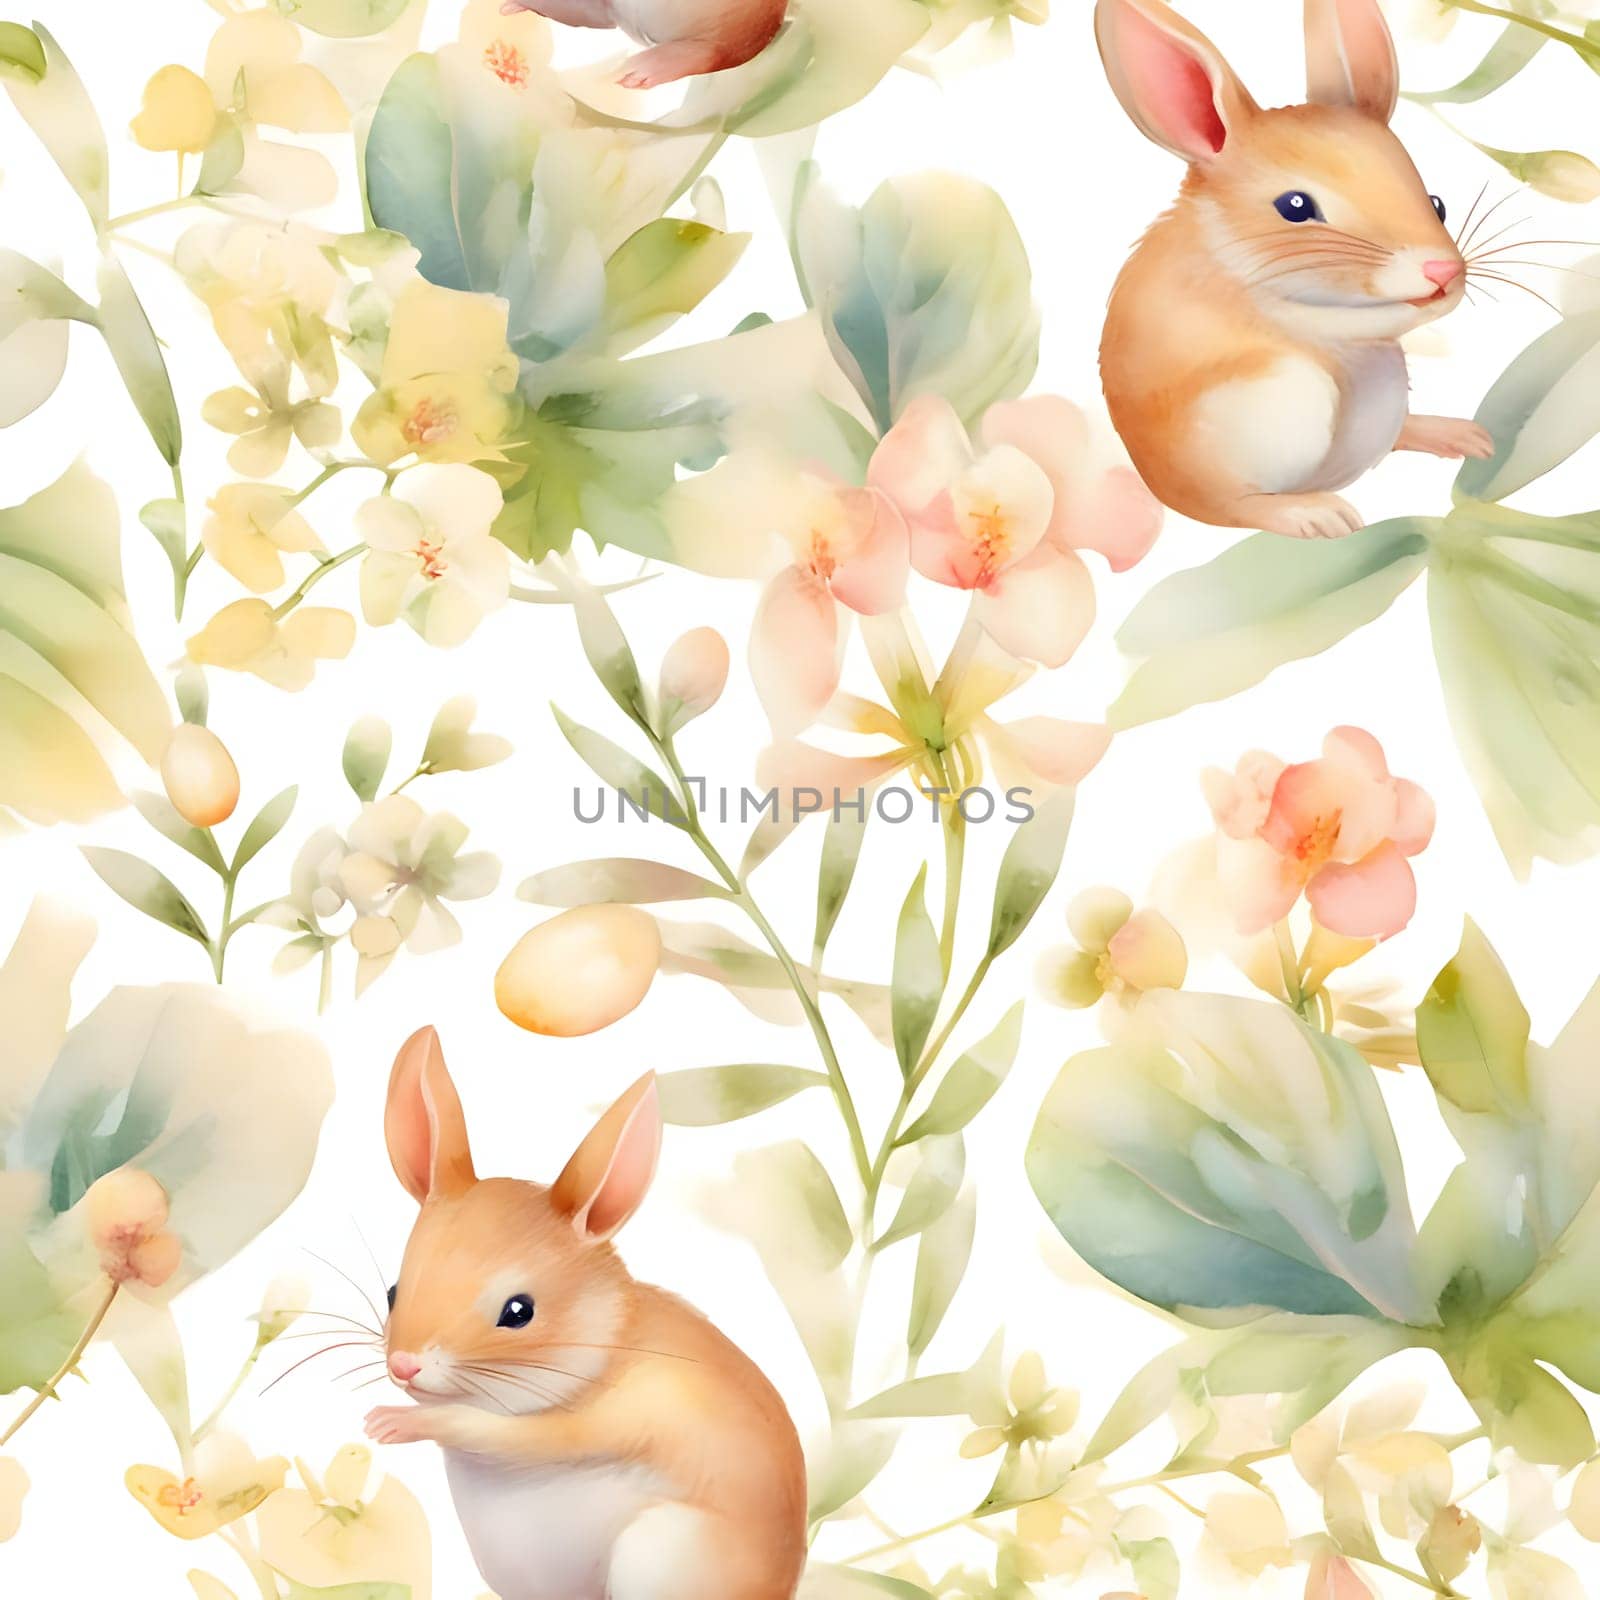 Patterns and banners backgrounds: Seamless pattern with watercolor rabbits and flowers. Illustration